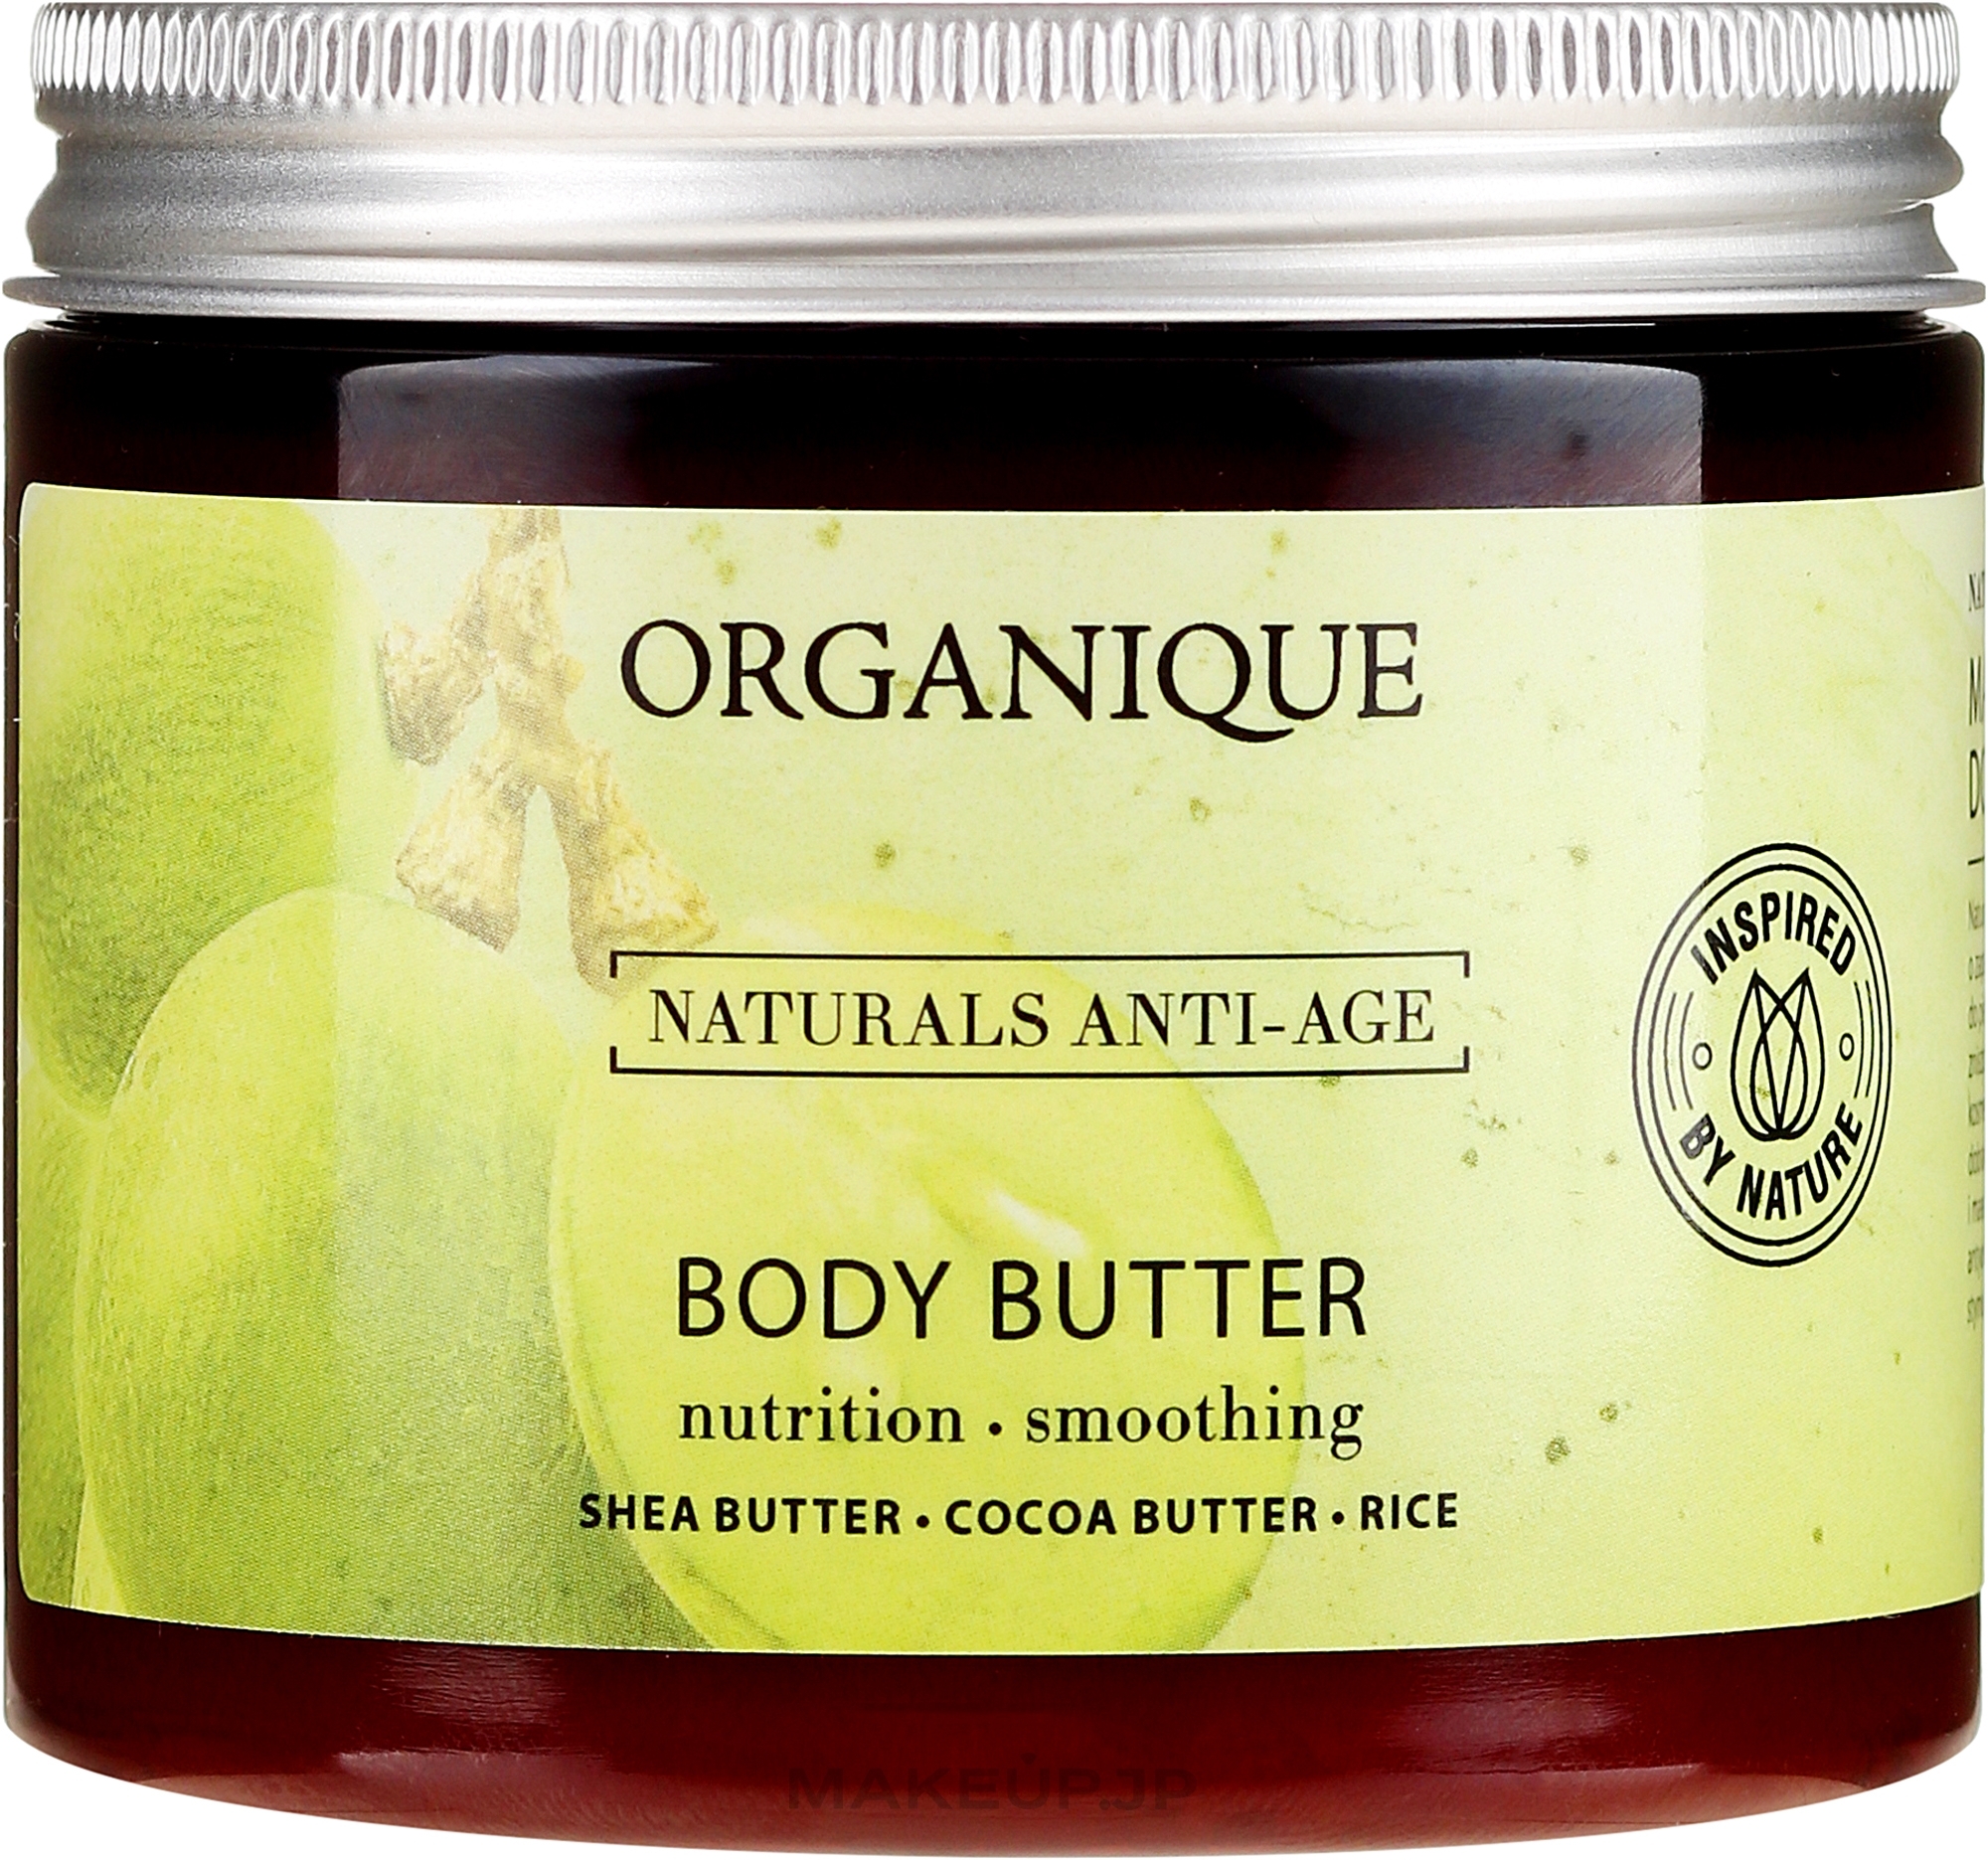 Anti-Aging Smoothing Body Butter - Organique Naturals Anti-Aging Body Butter — photo 200 ml